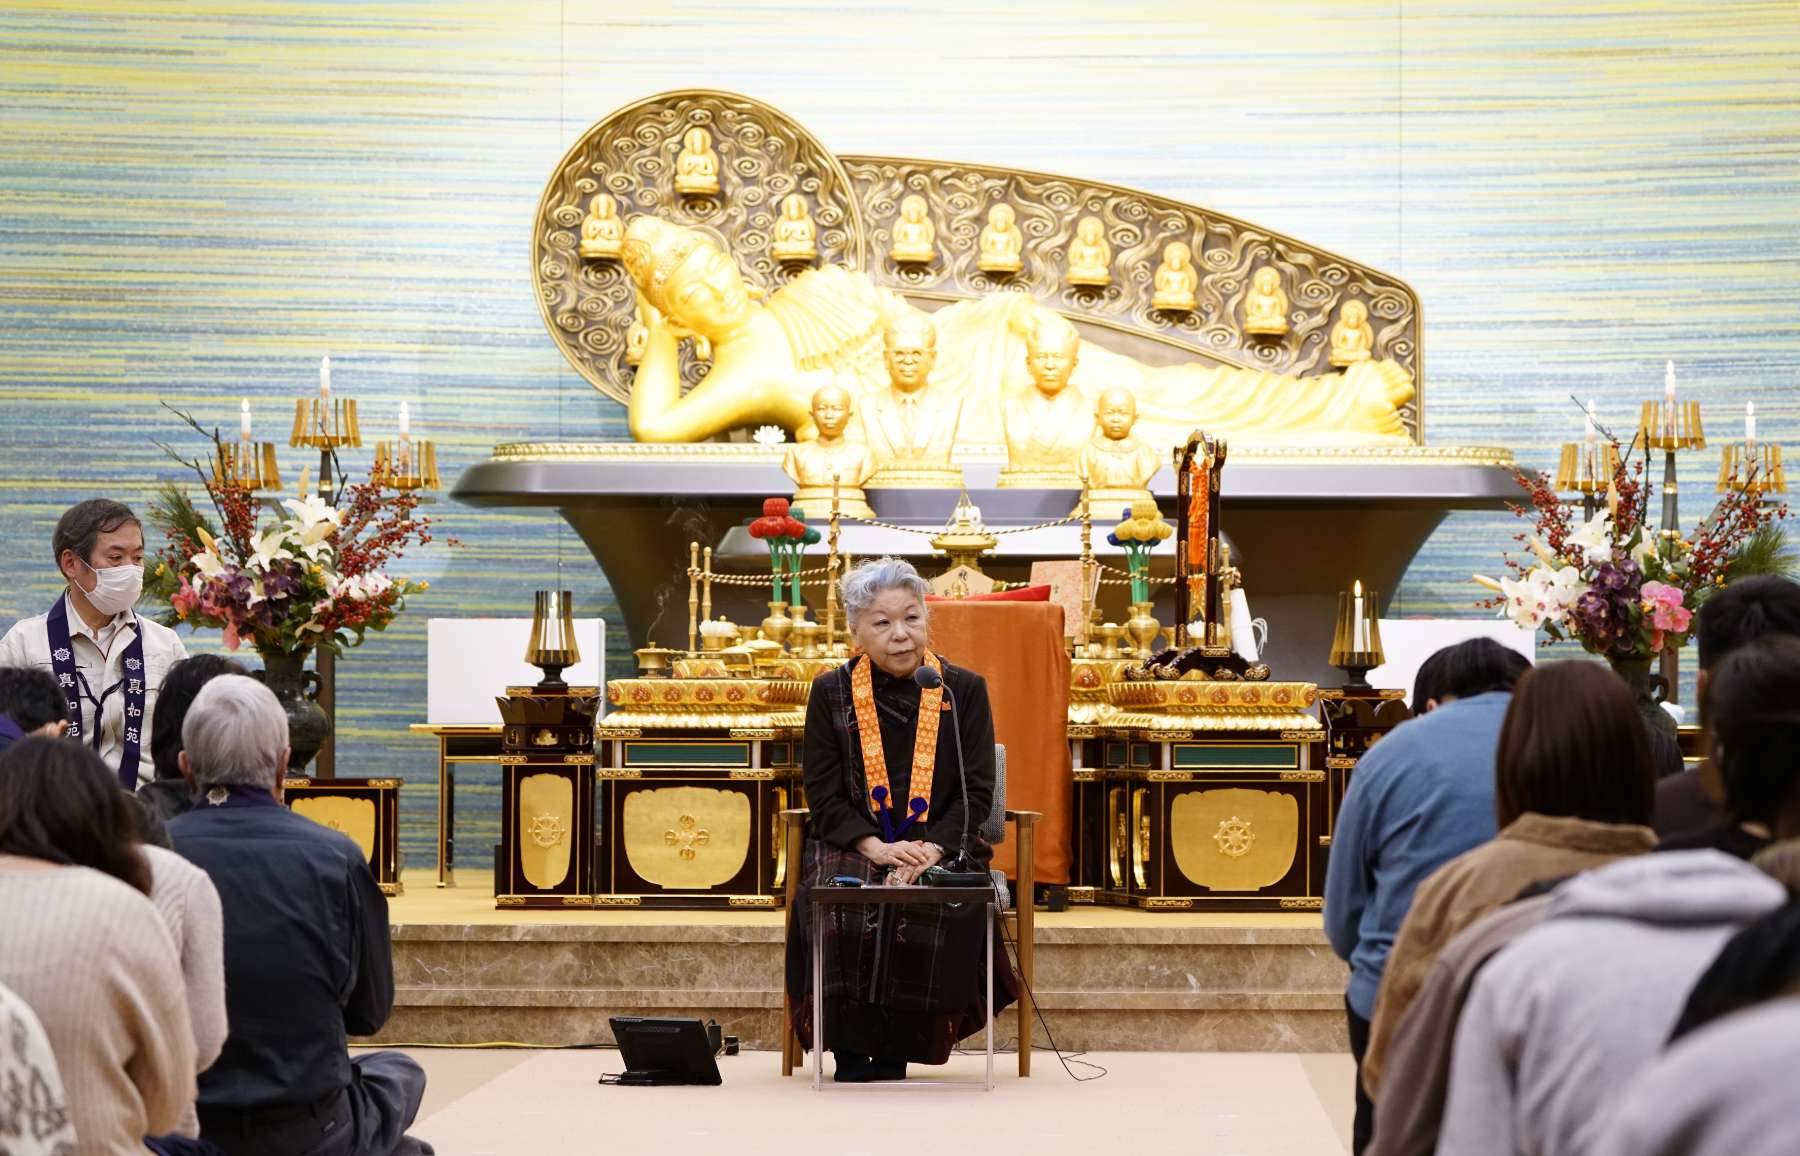 An elderly Japanese woman dressed in black attire with a priestly Buddhist surplice around her shoulders sits on a low chair in front of a Buddhist shrine with a large statue of a reclining Buddha, speaking intently to an audience of Japanese people seated neatly in rows on the floor.